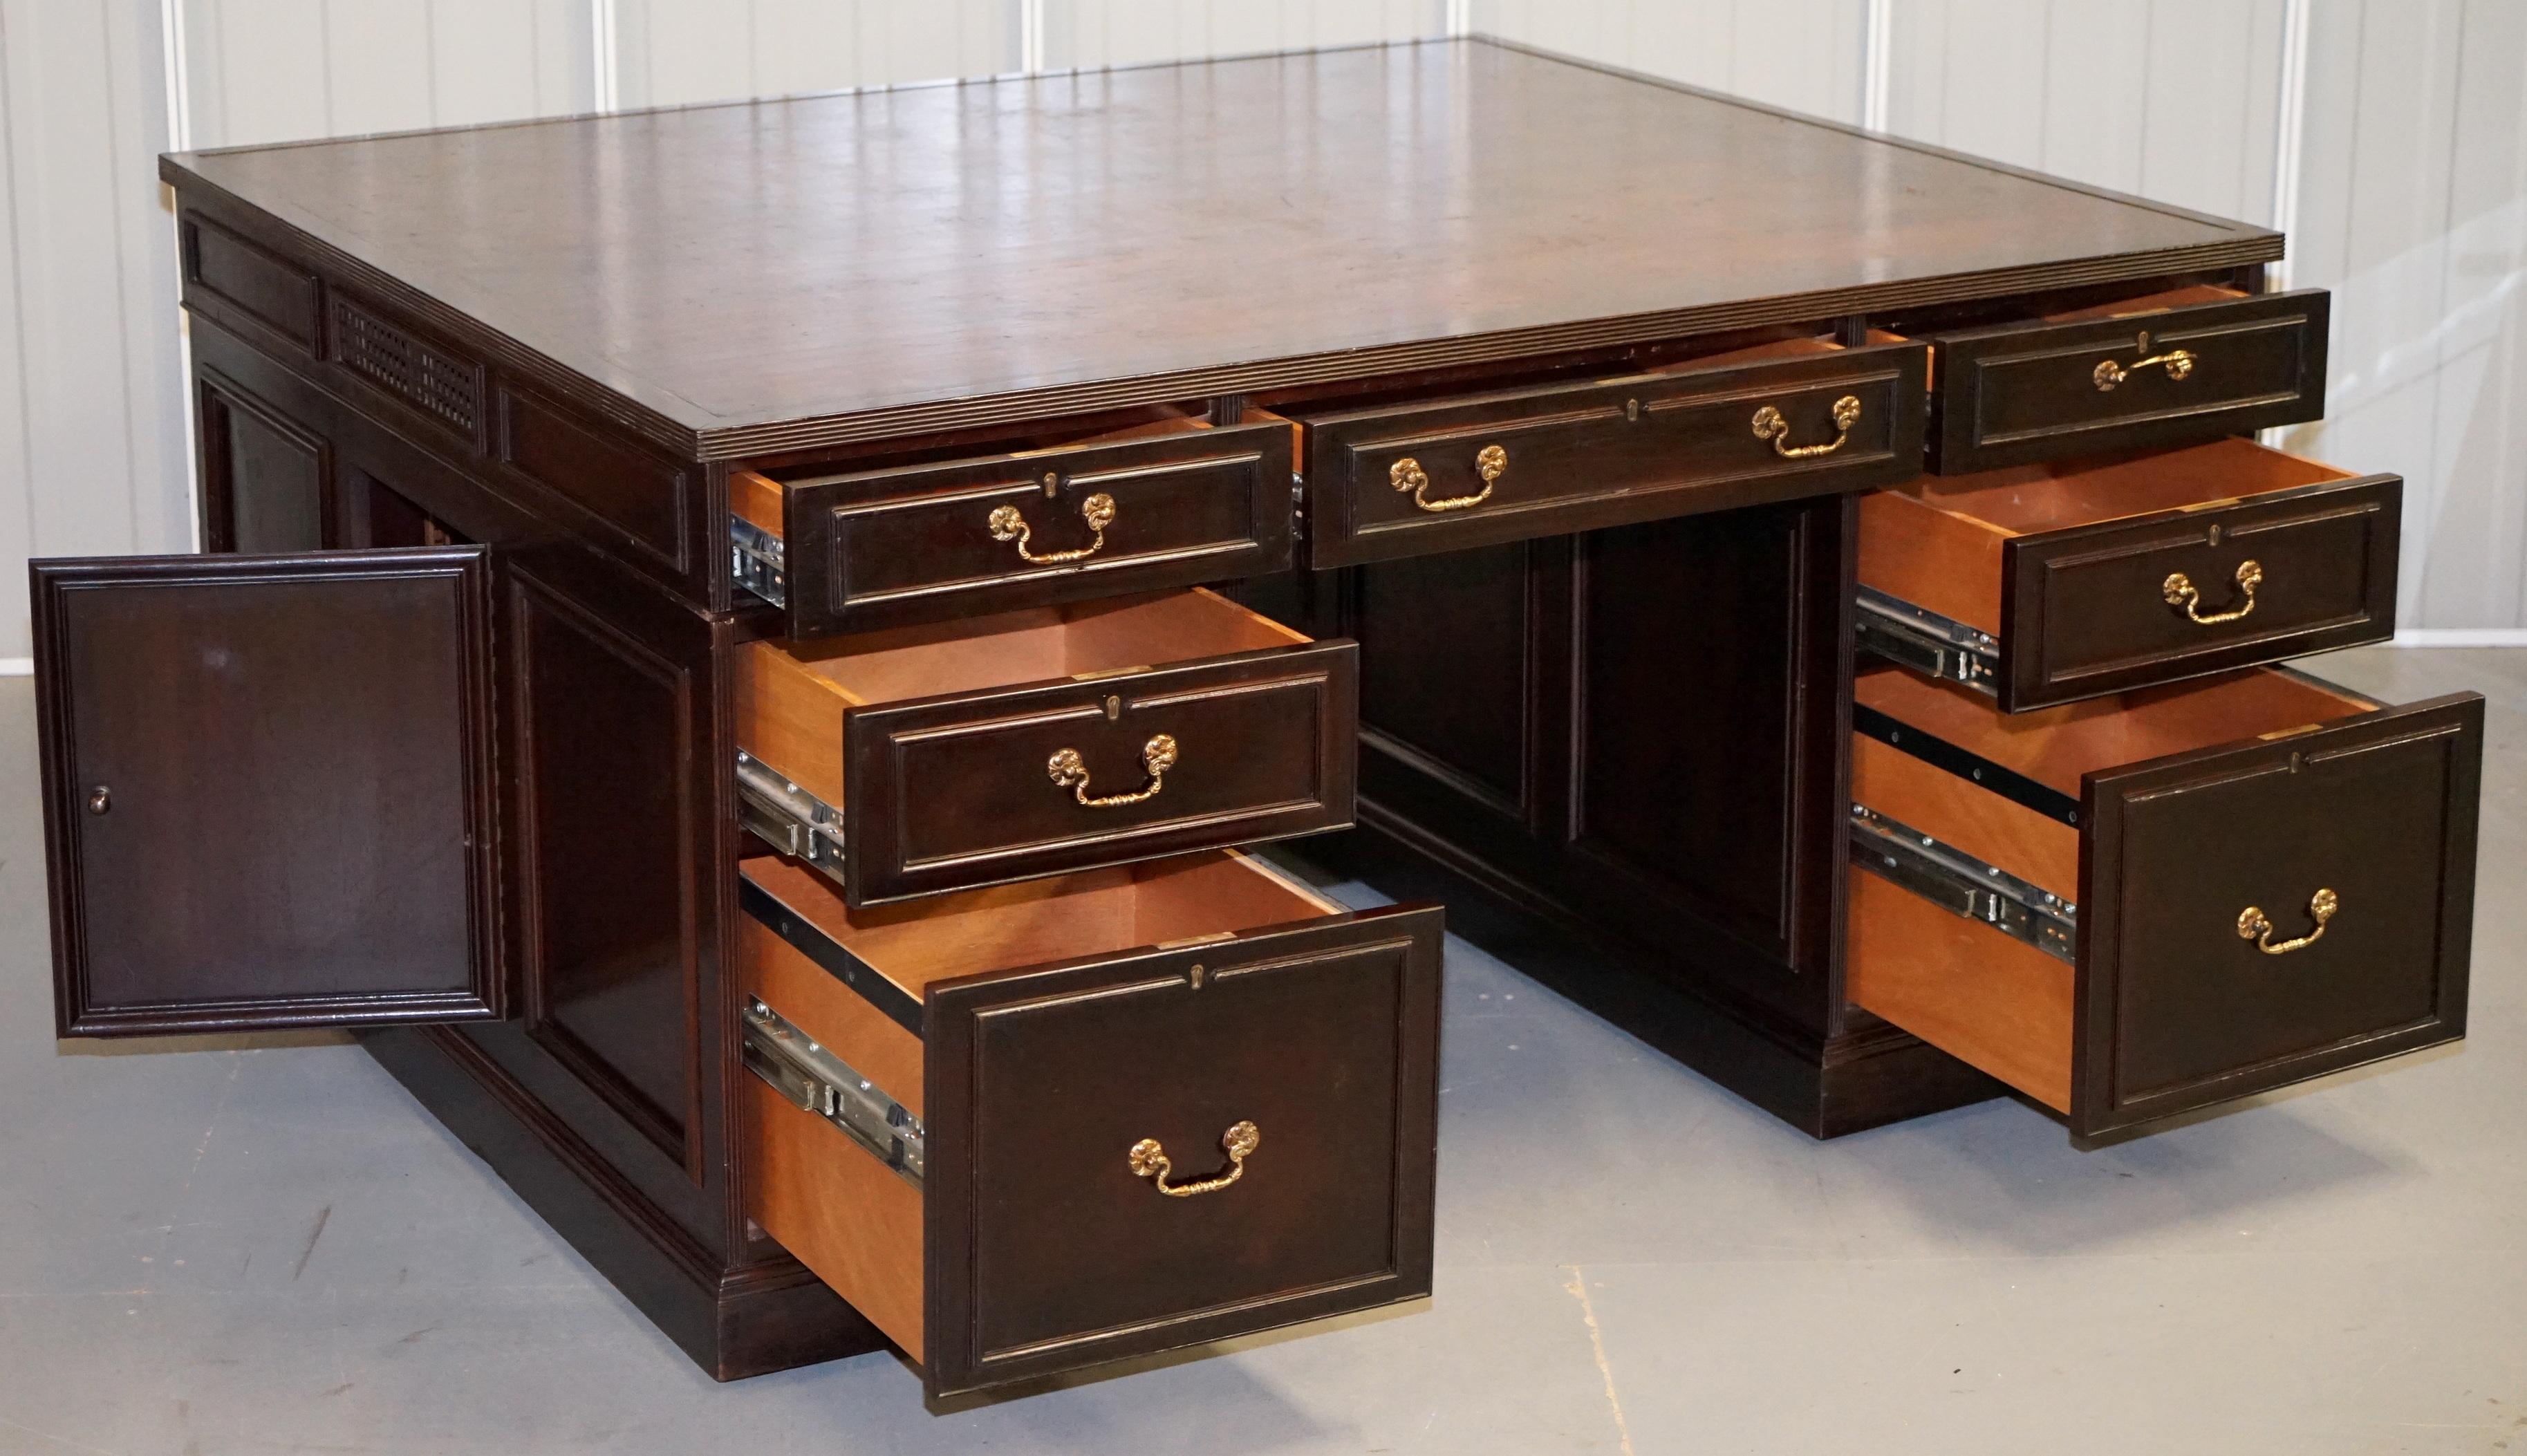 We are delighted to offer for sale this monumental solid hardwood 14-drawer two bookshelf twin pedestal partner desk

This desk is large and in charge, its naturally designed for two “Partners” to share, the style dates back to the old legal desks